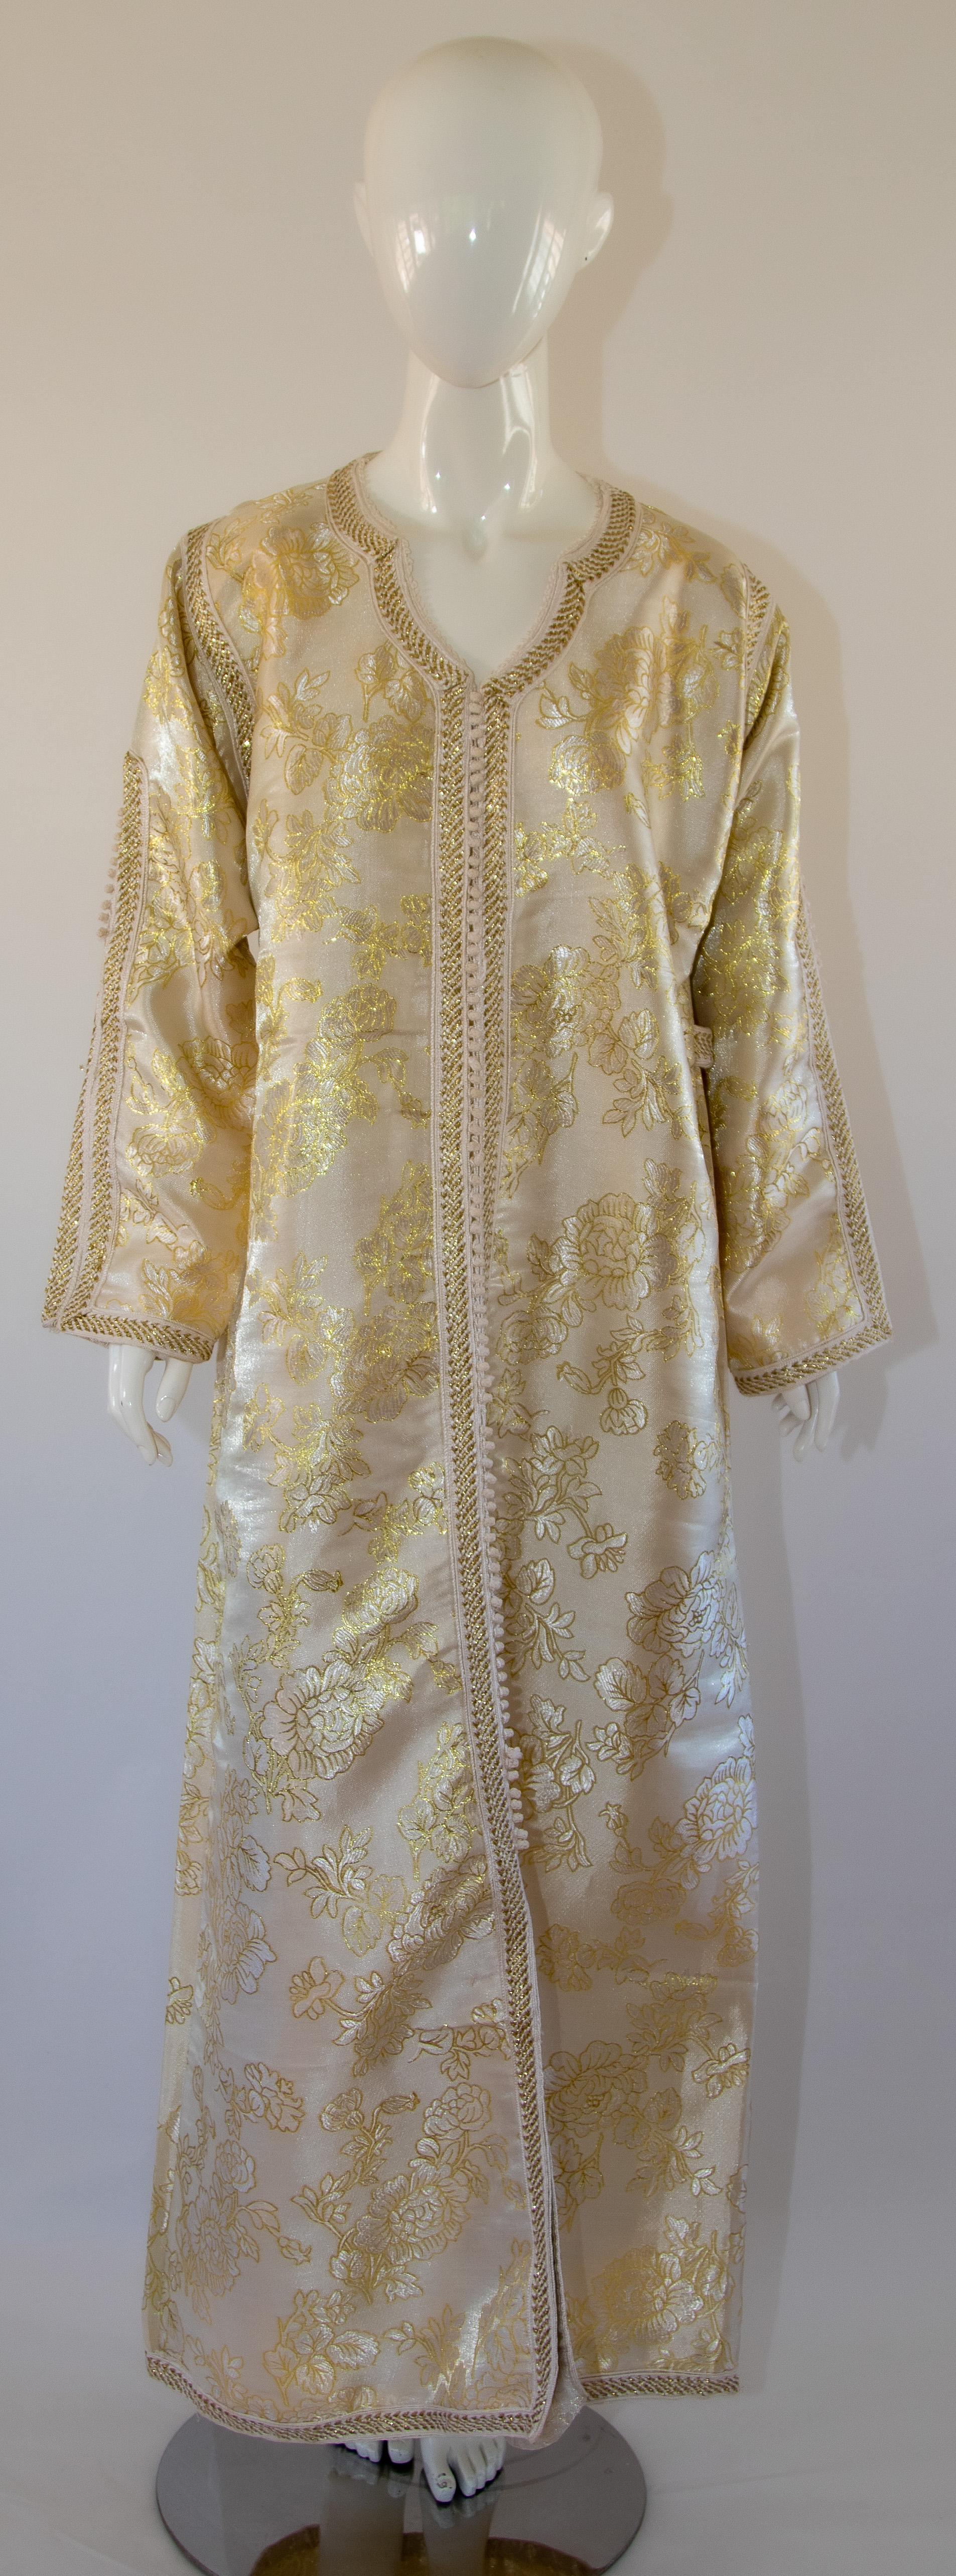 Vintage Moroccan Caftan in Gold Brocade Maxi Dress Kaftan Size L to XL For Sale 14